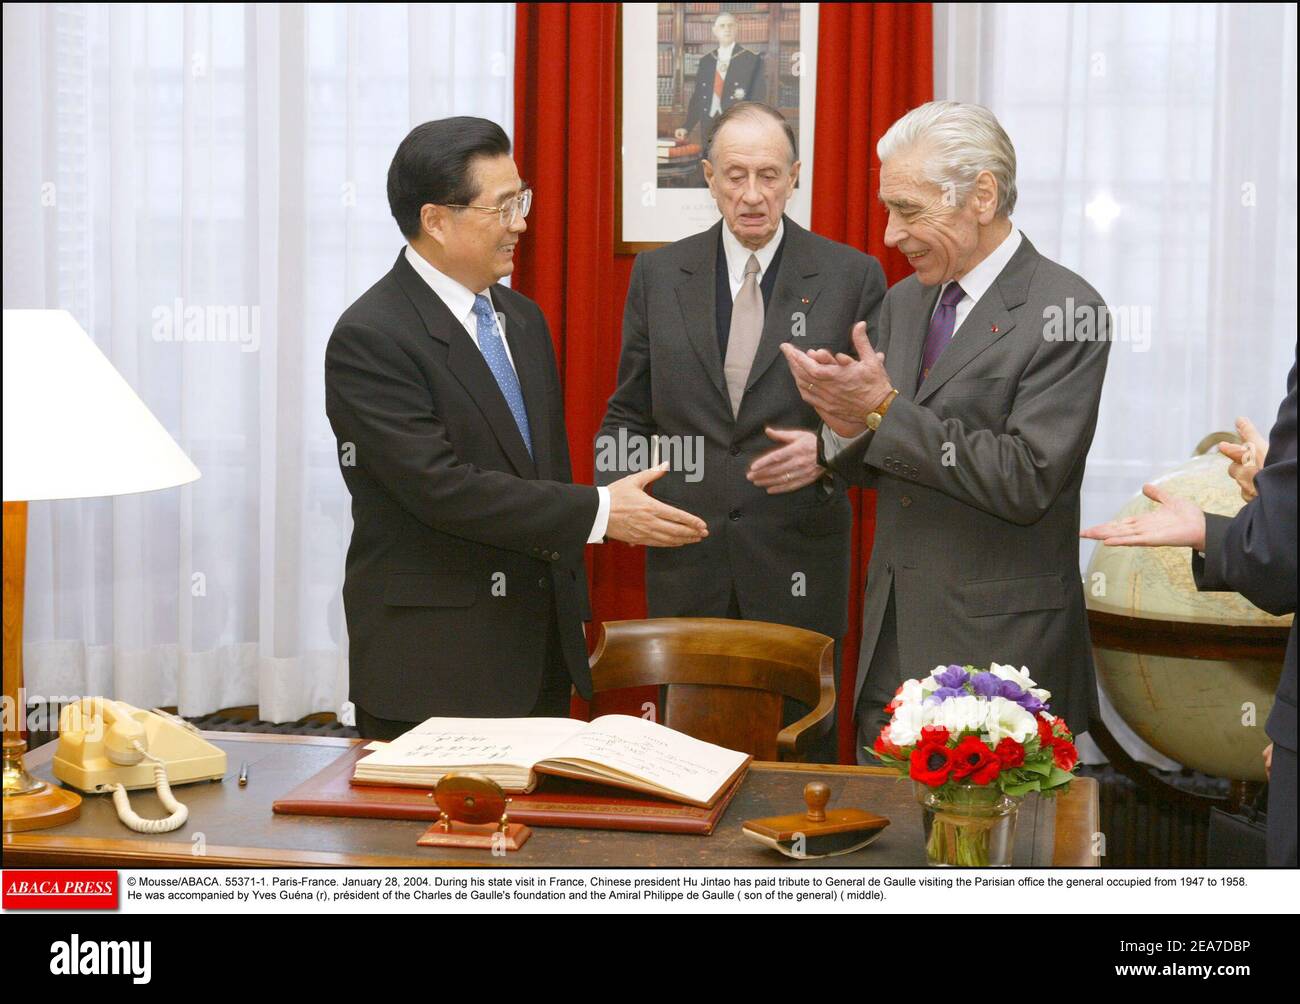 © Mousse/ABACA. 55371-1. Paris-France. January 28, 2004. During his state visit in France, Chinese president Hu Jintao has paid tribute to General de Gaulle visiting the Parisian office the general occupied from 1947 to 1958. He was accompanied by Yves Guna (r), prsident of the Charles de Gaulle's foundation and the Amiral Philippe de Gaulle ( son of the general) ( middle). Stock Photo